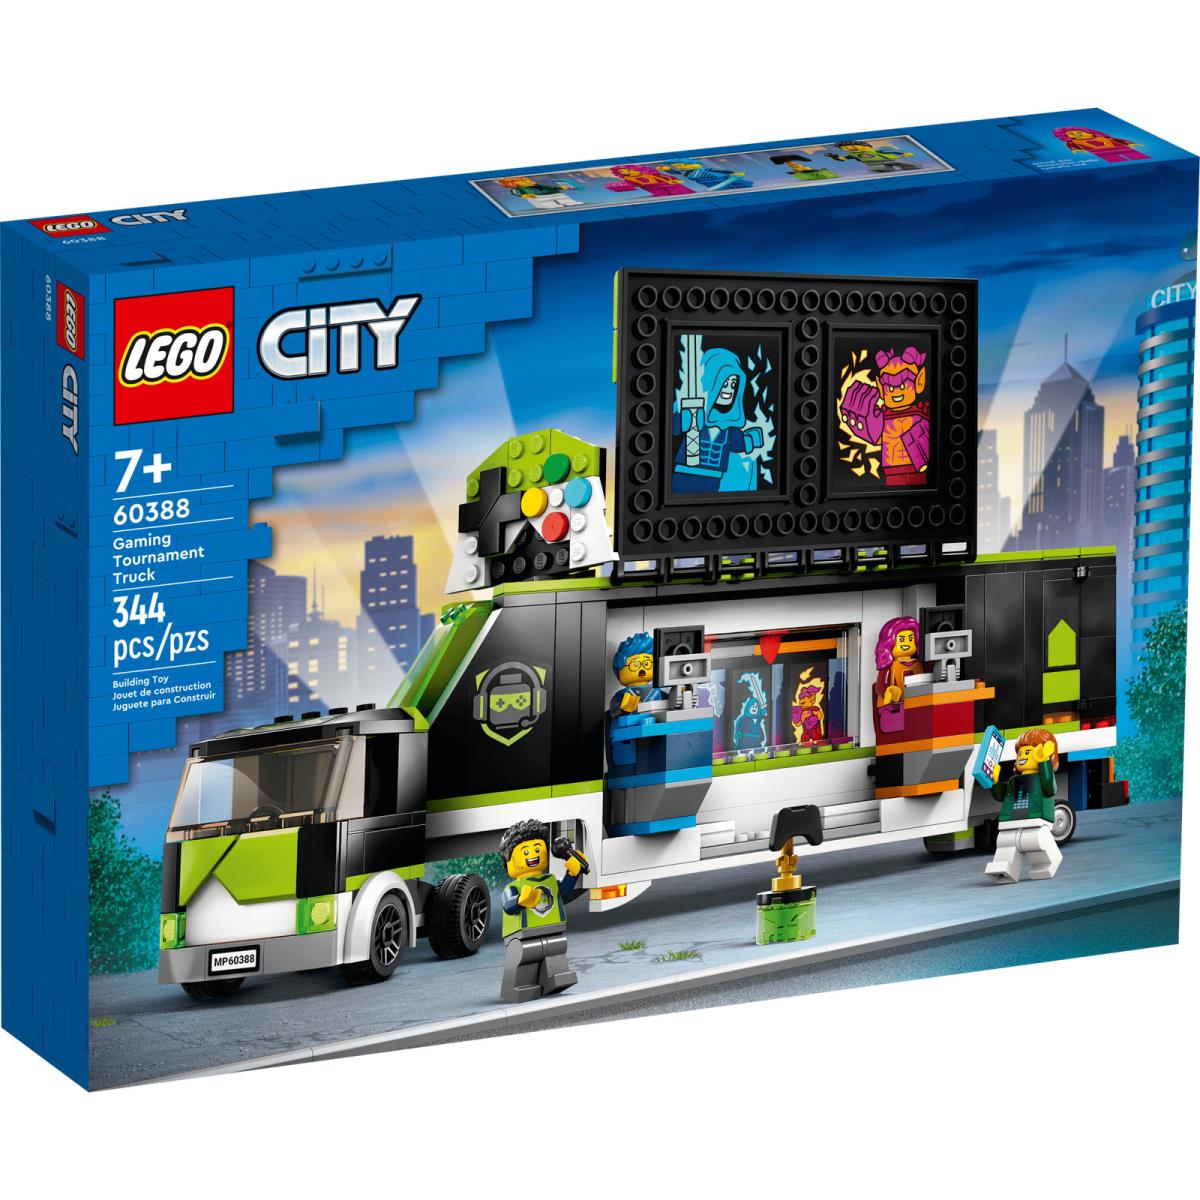 Lego City Gaming Tournament Truck 60388 Building Toy Set Gift